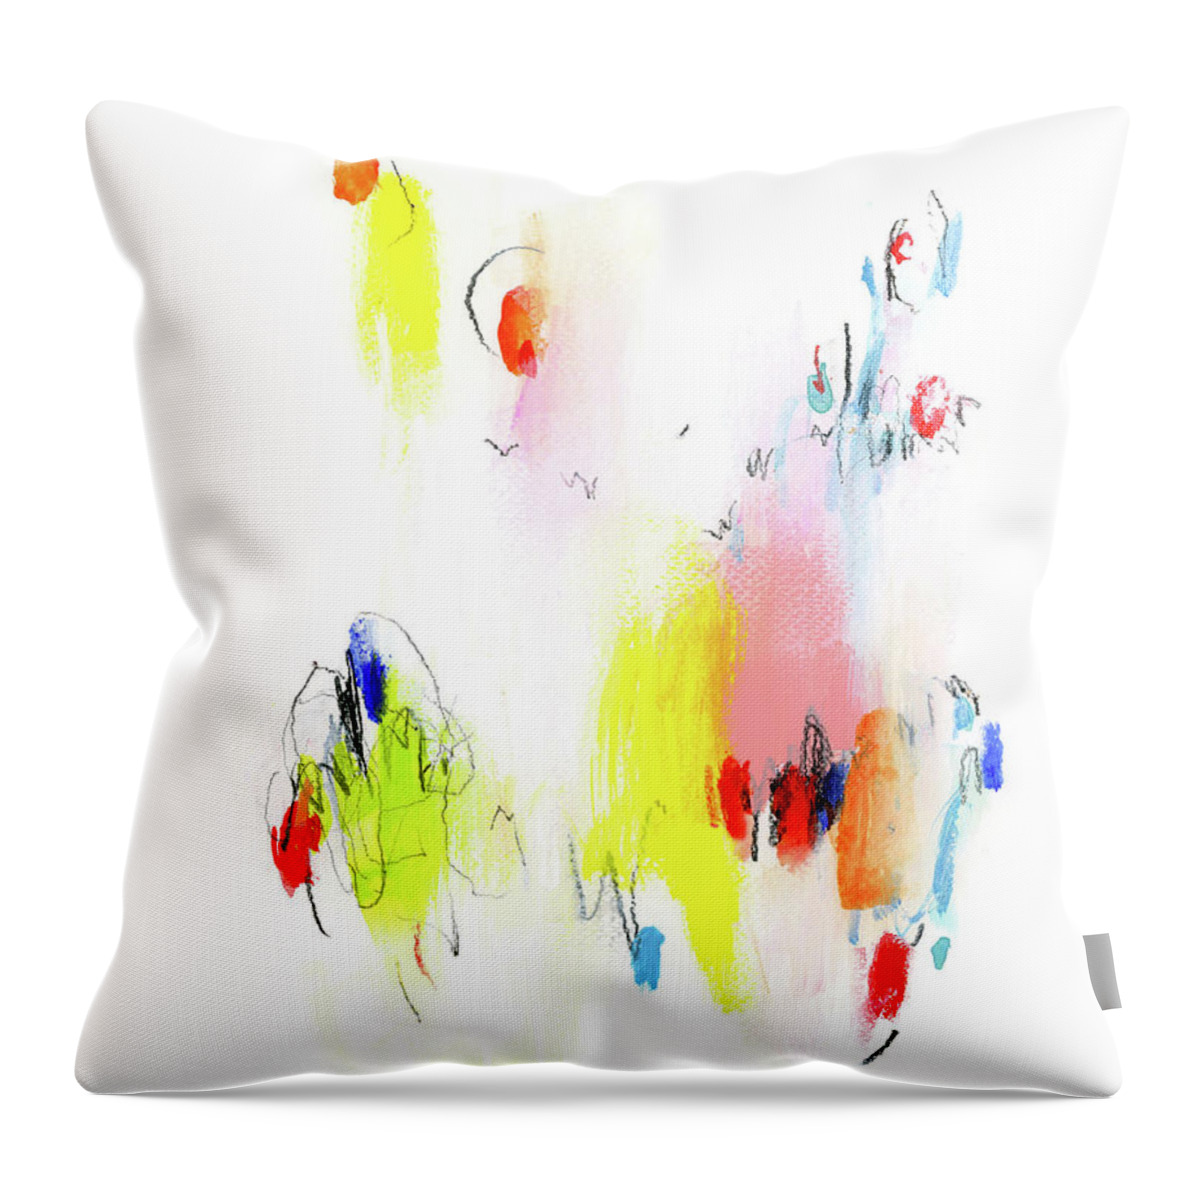 Colorful Throw Pillow featuring the painting Circus 06 by AF Duealberi